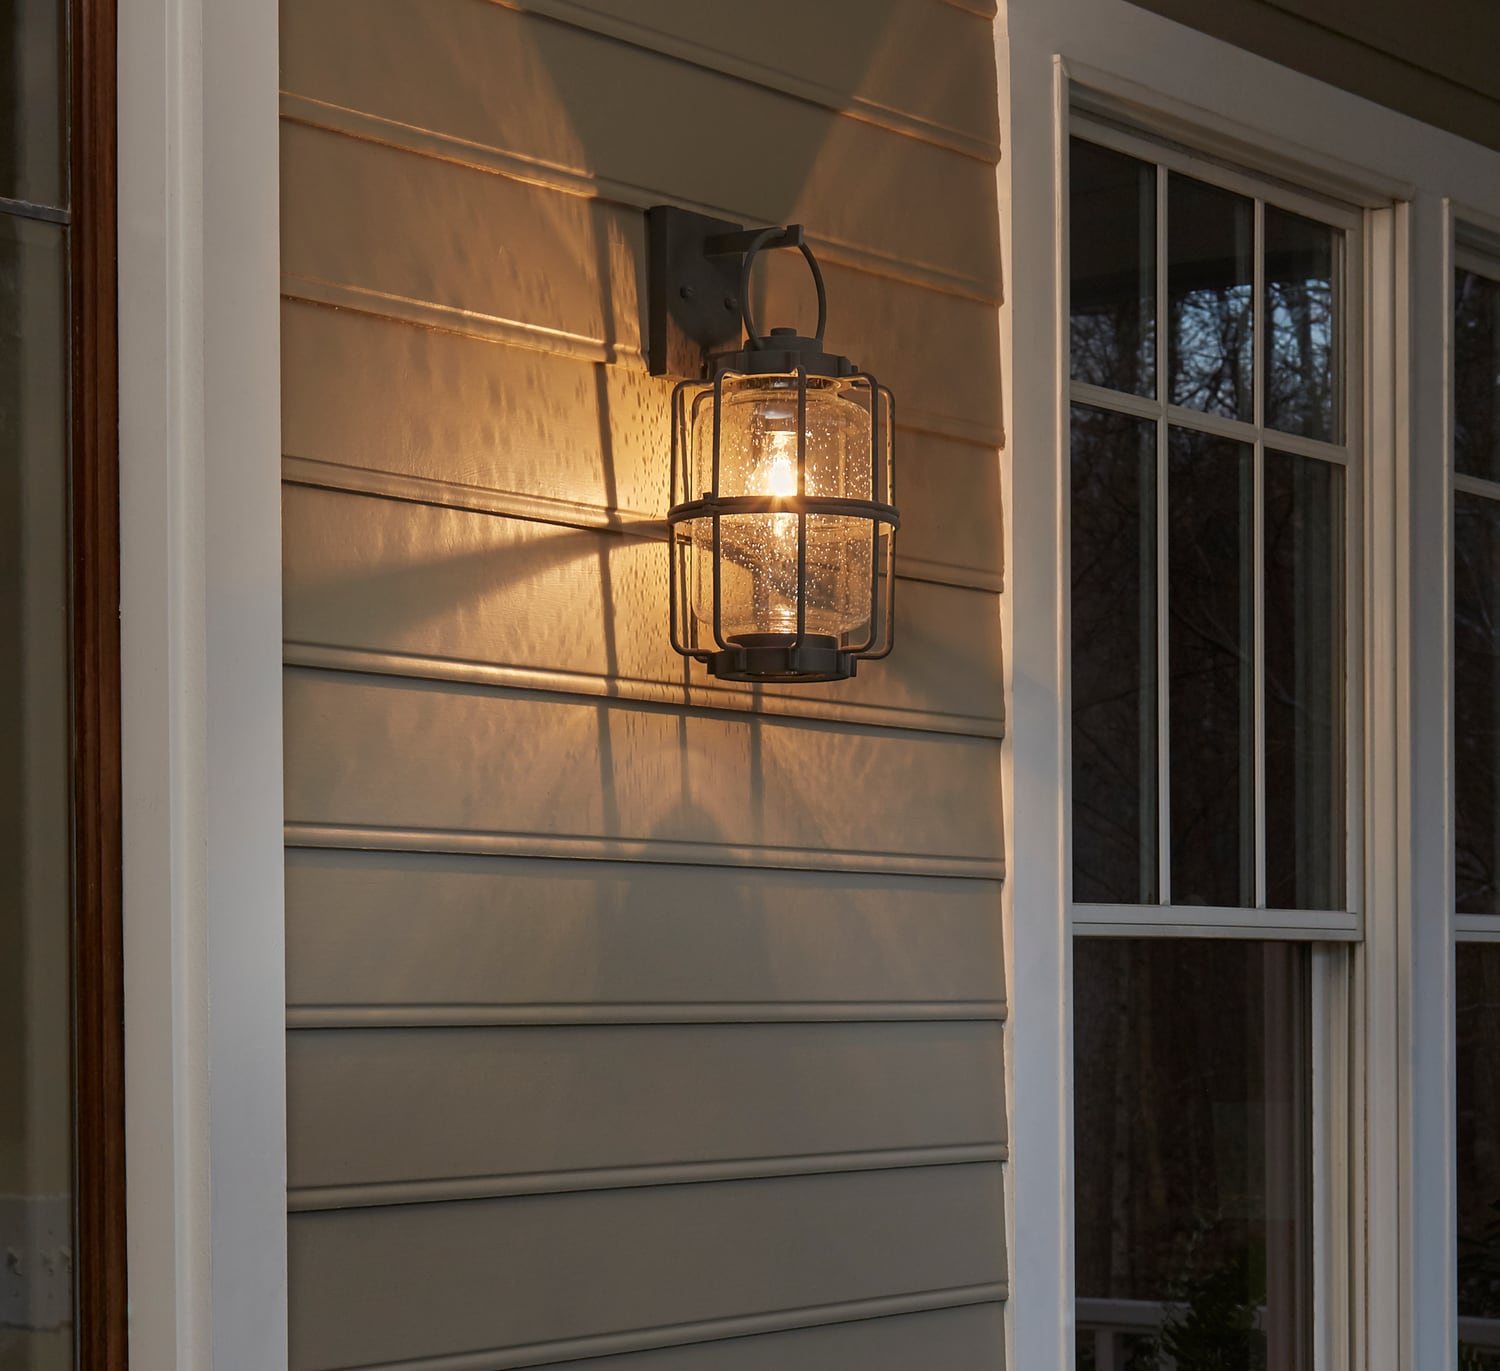 Kichler Montview Weathered Zinc Outdoor Lighting Collection